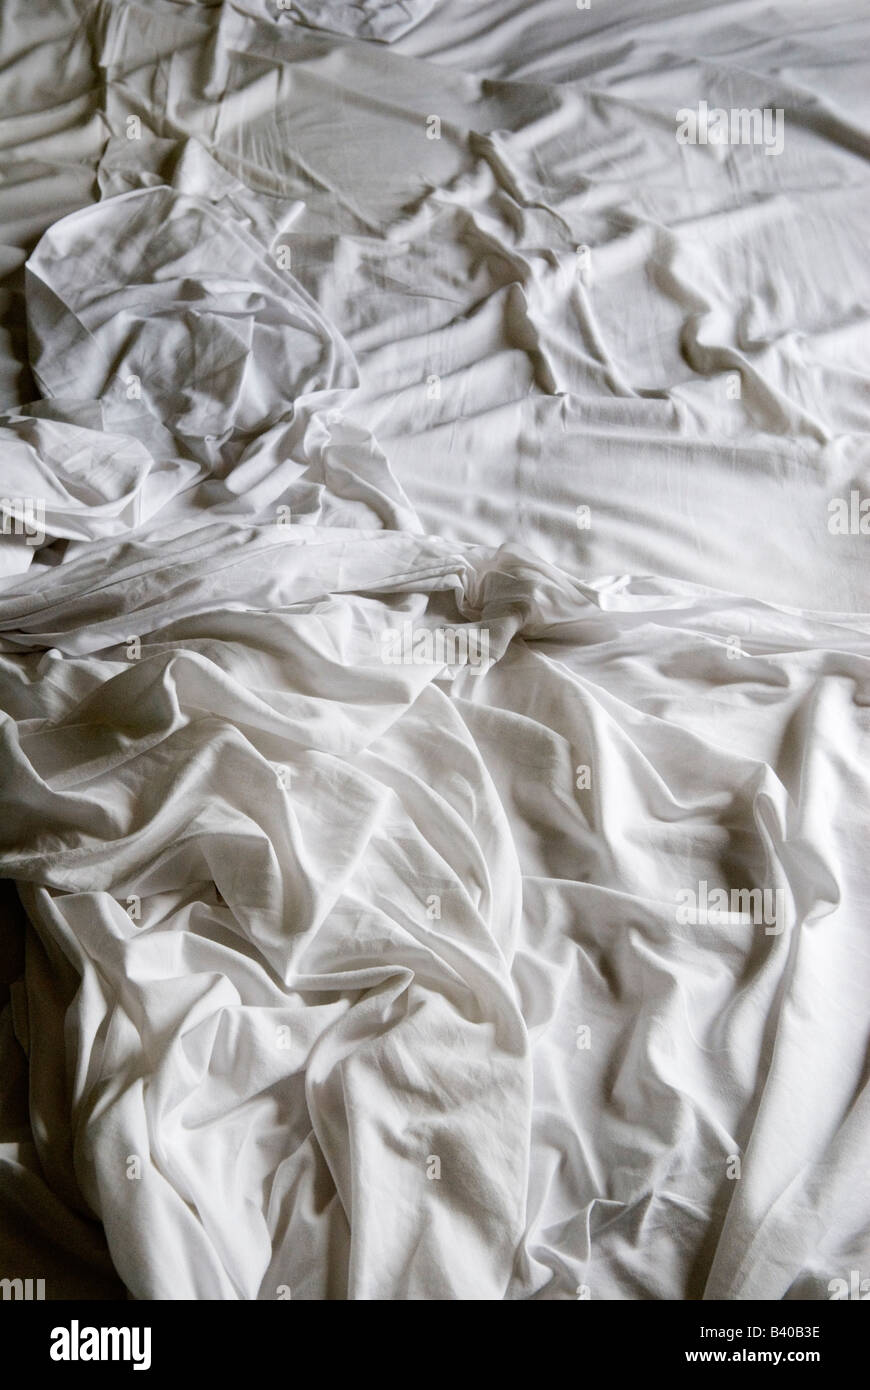 Unmade bed white bed sheets crumpled Stock Photo